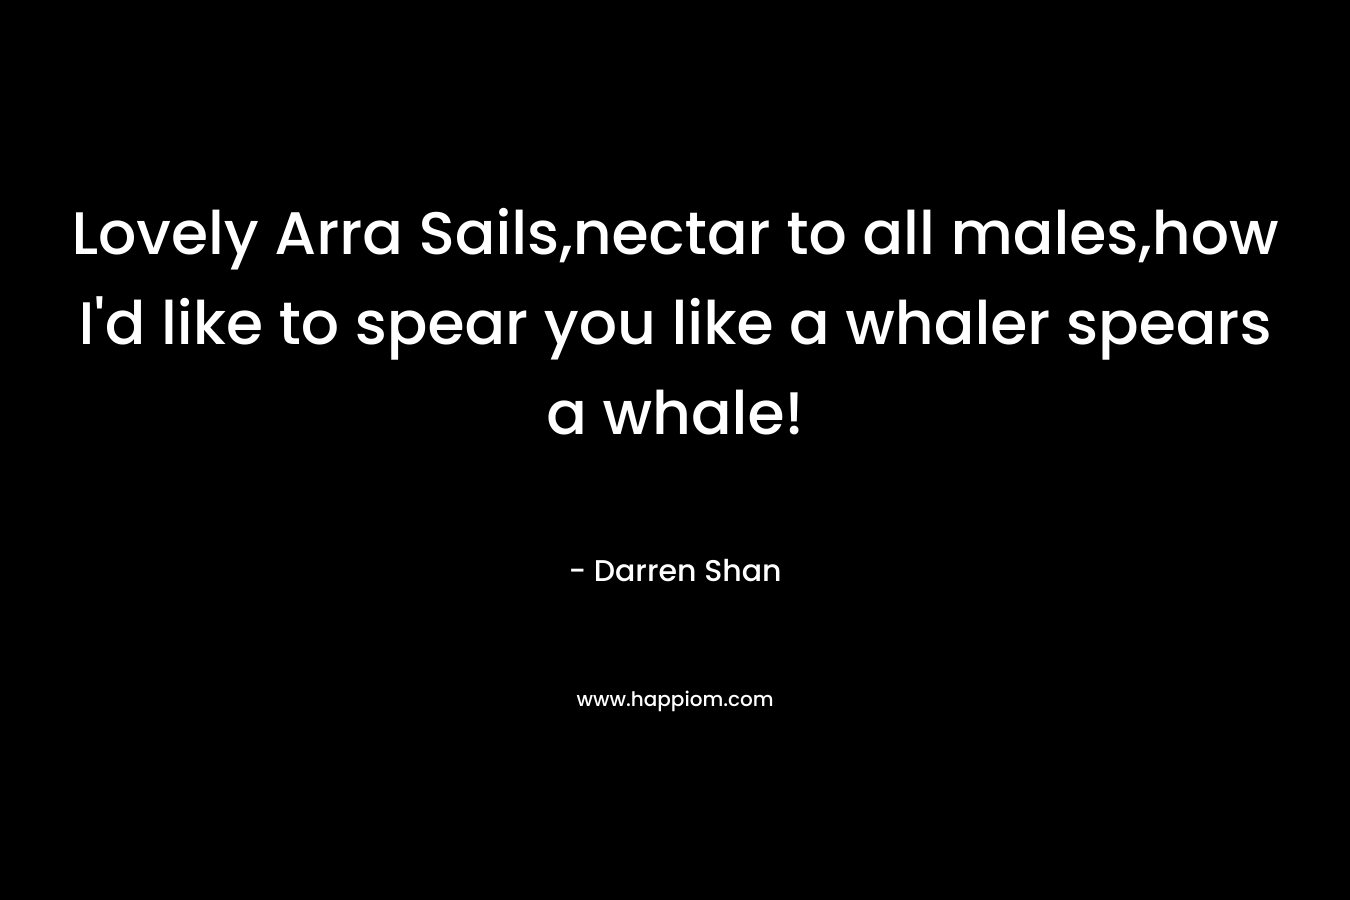 Lovely Arra Sails,nectar to all males,how I'd like to spear you like a whaler spears a whale!